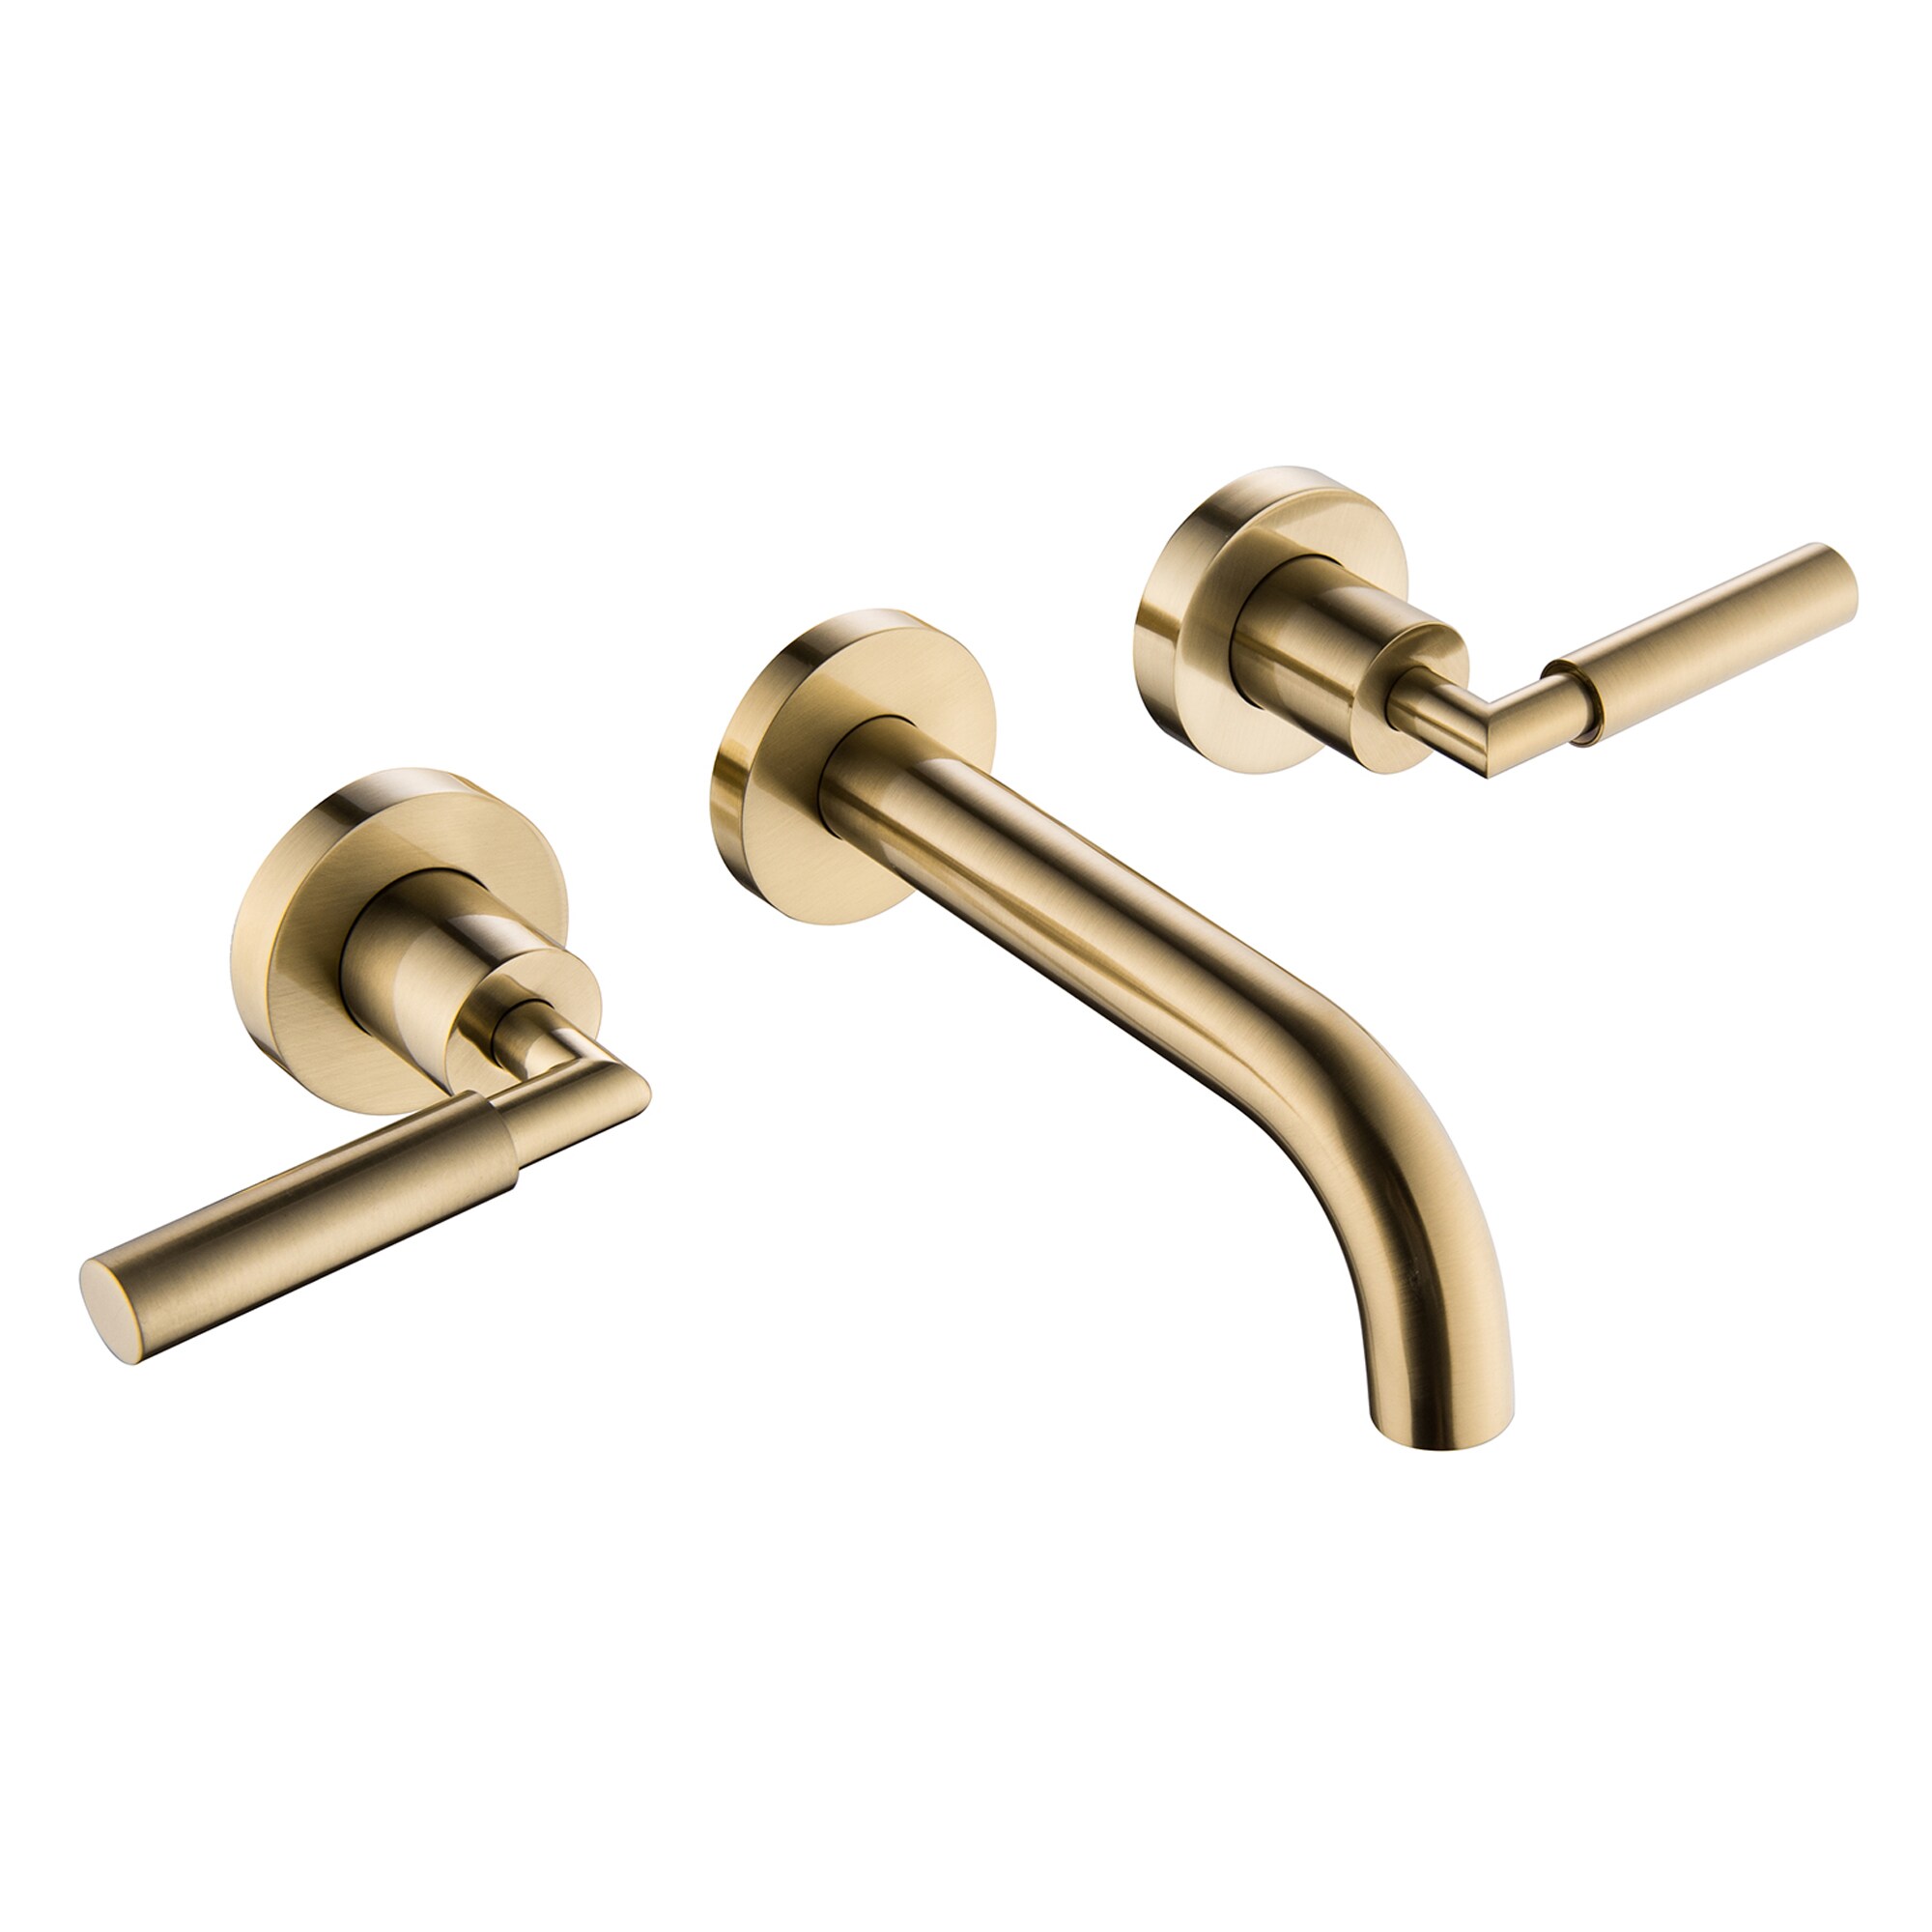 Brushed Gold Bathroom Faucet Waterfall Wall Mounted Double Handles Tub Mixer Tap 